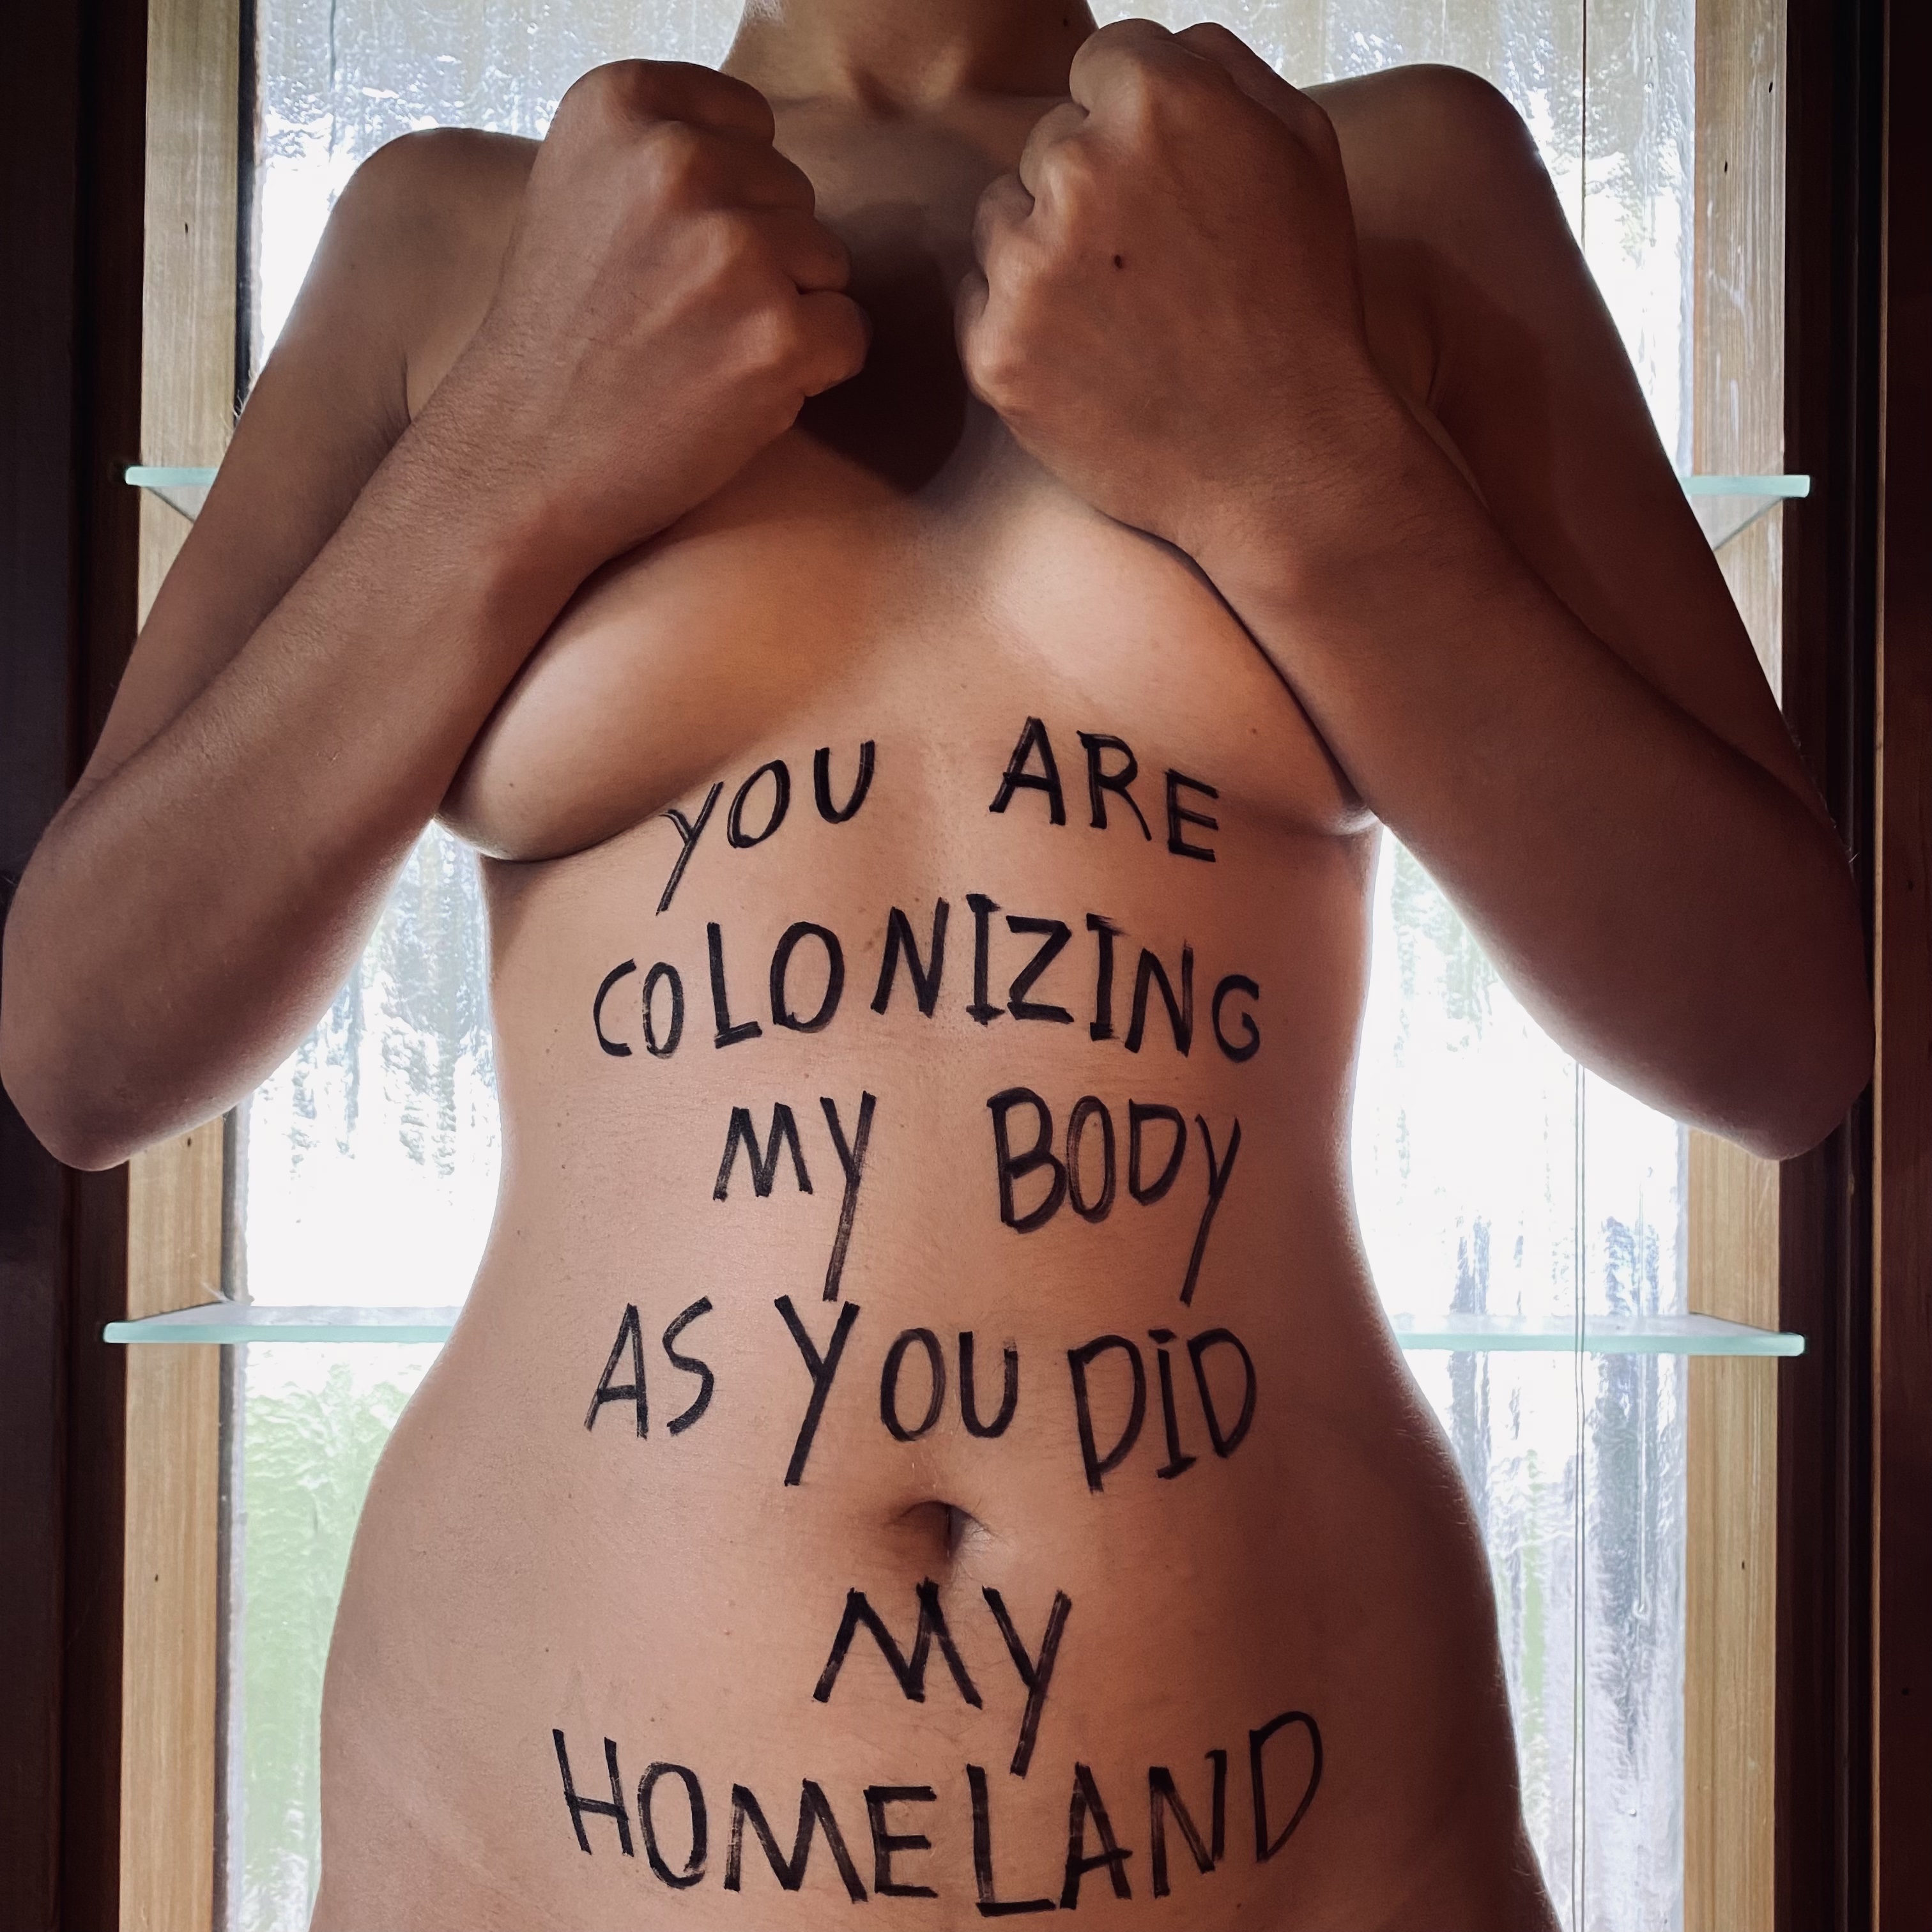 A naked, female-presenting torso faces the camera in the foreground, in front of a window; her arms partially cover her breasts; her fists are clenched and poised up, as if ready to punch. On her belly is a message written in thick, black, all-caps: YOU ARE COLONIZING MY BODY AS YOU DID MY HOMELAND